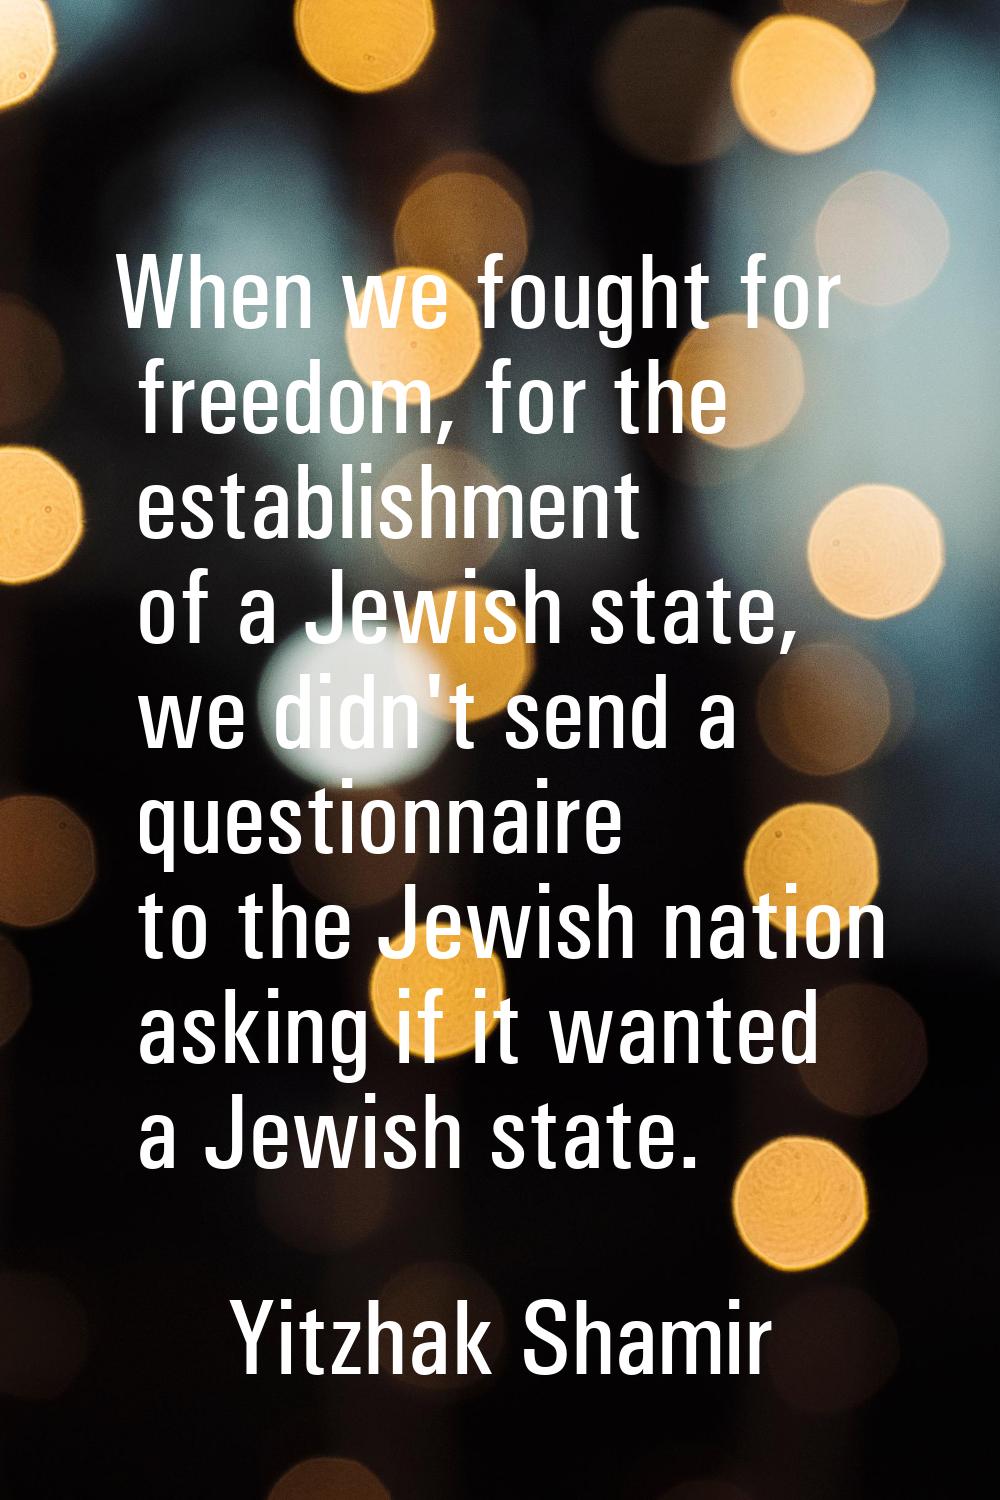 When we fought for freedom, for the establishment of a Jewish state, we didn't send a questionnaire